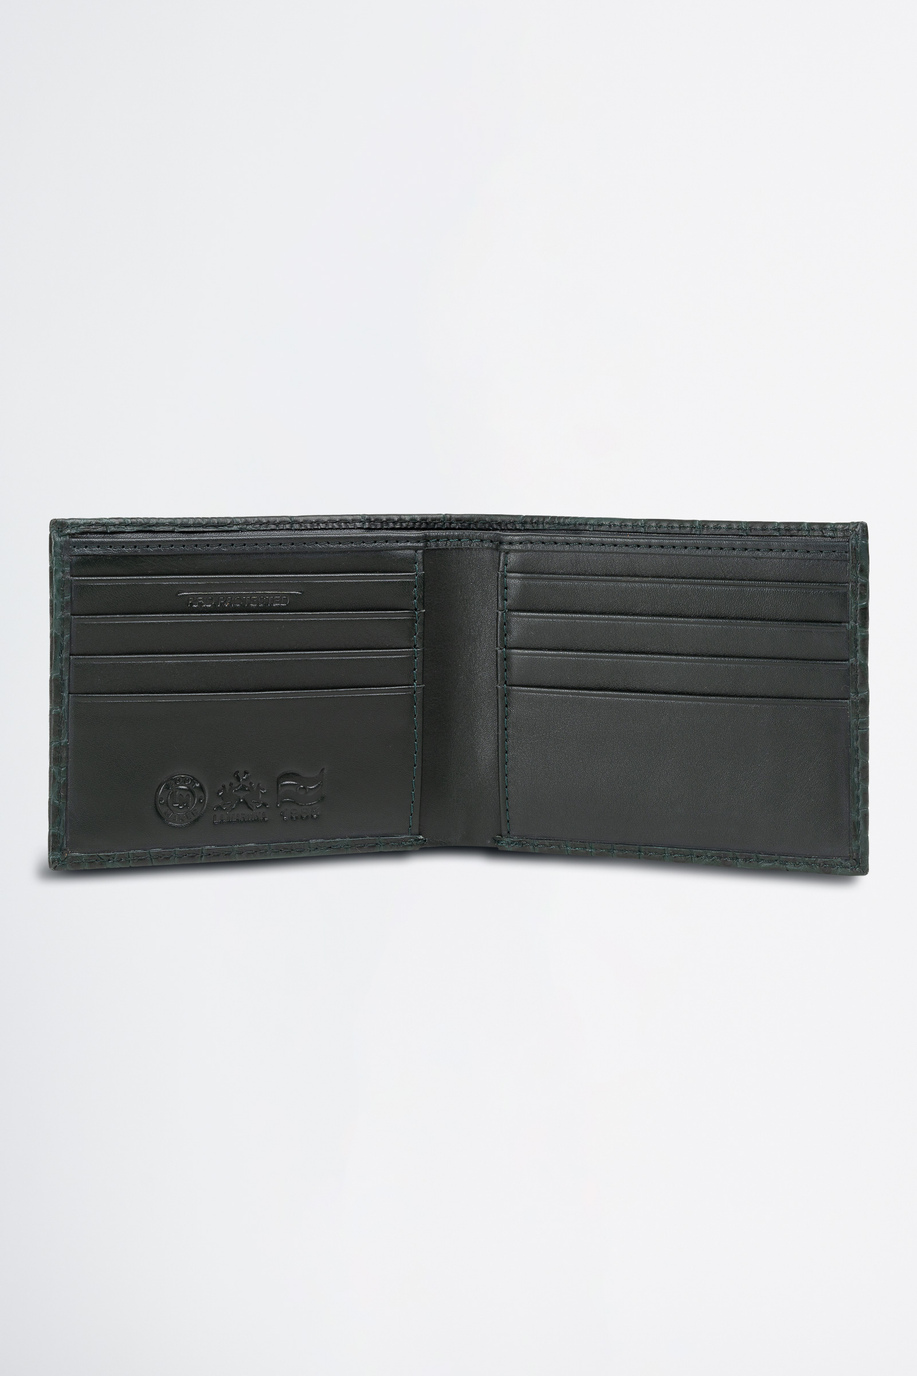 Men’s wallet with logo - Wallets and key chains | La Martina - Official Online Shop